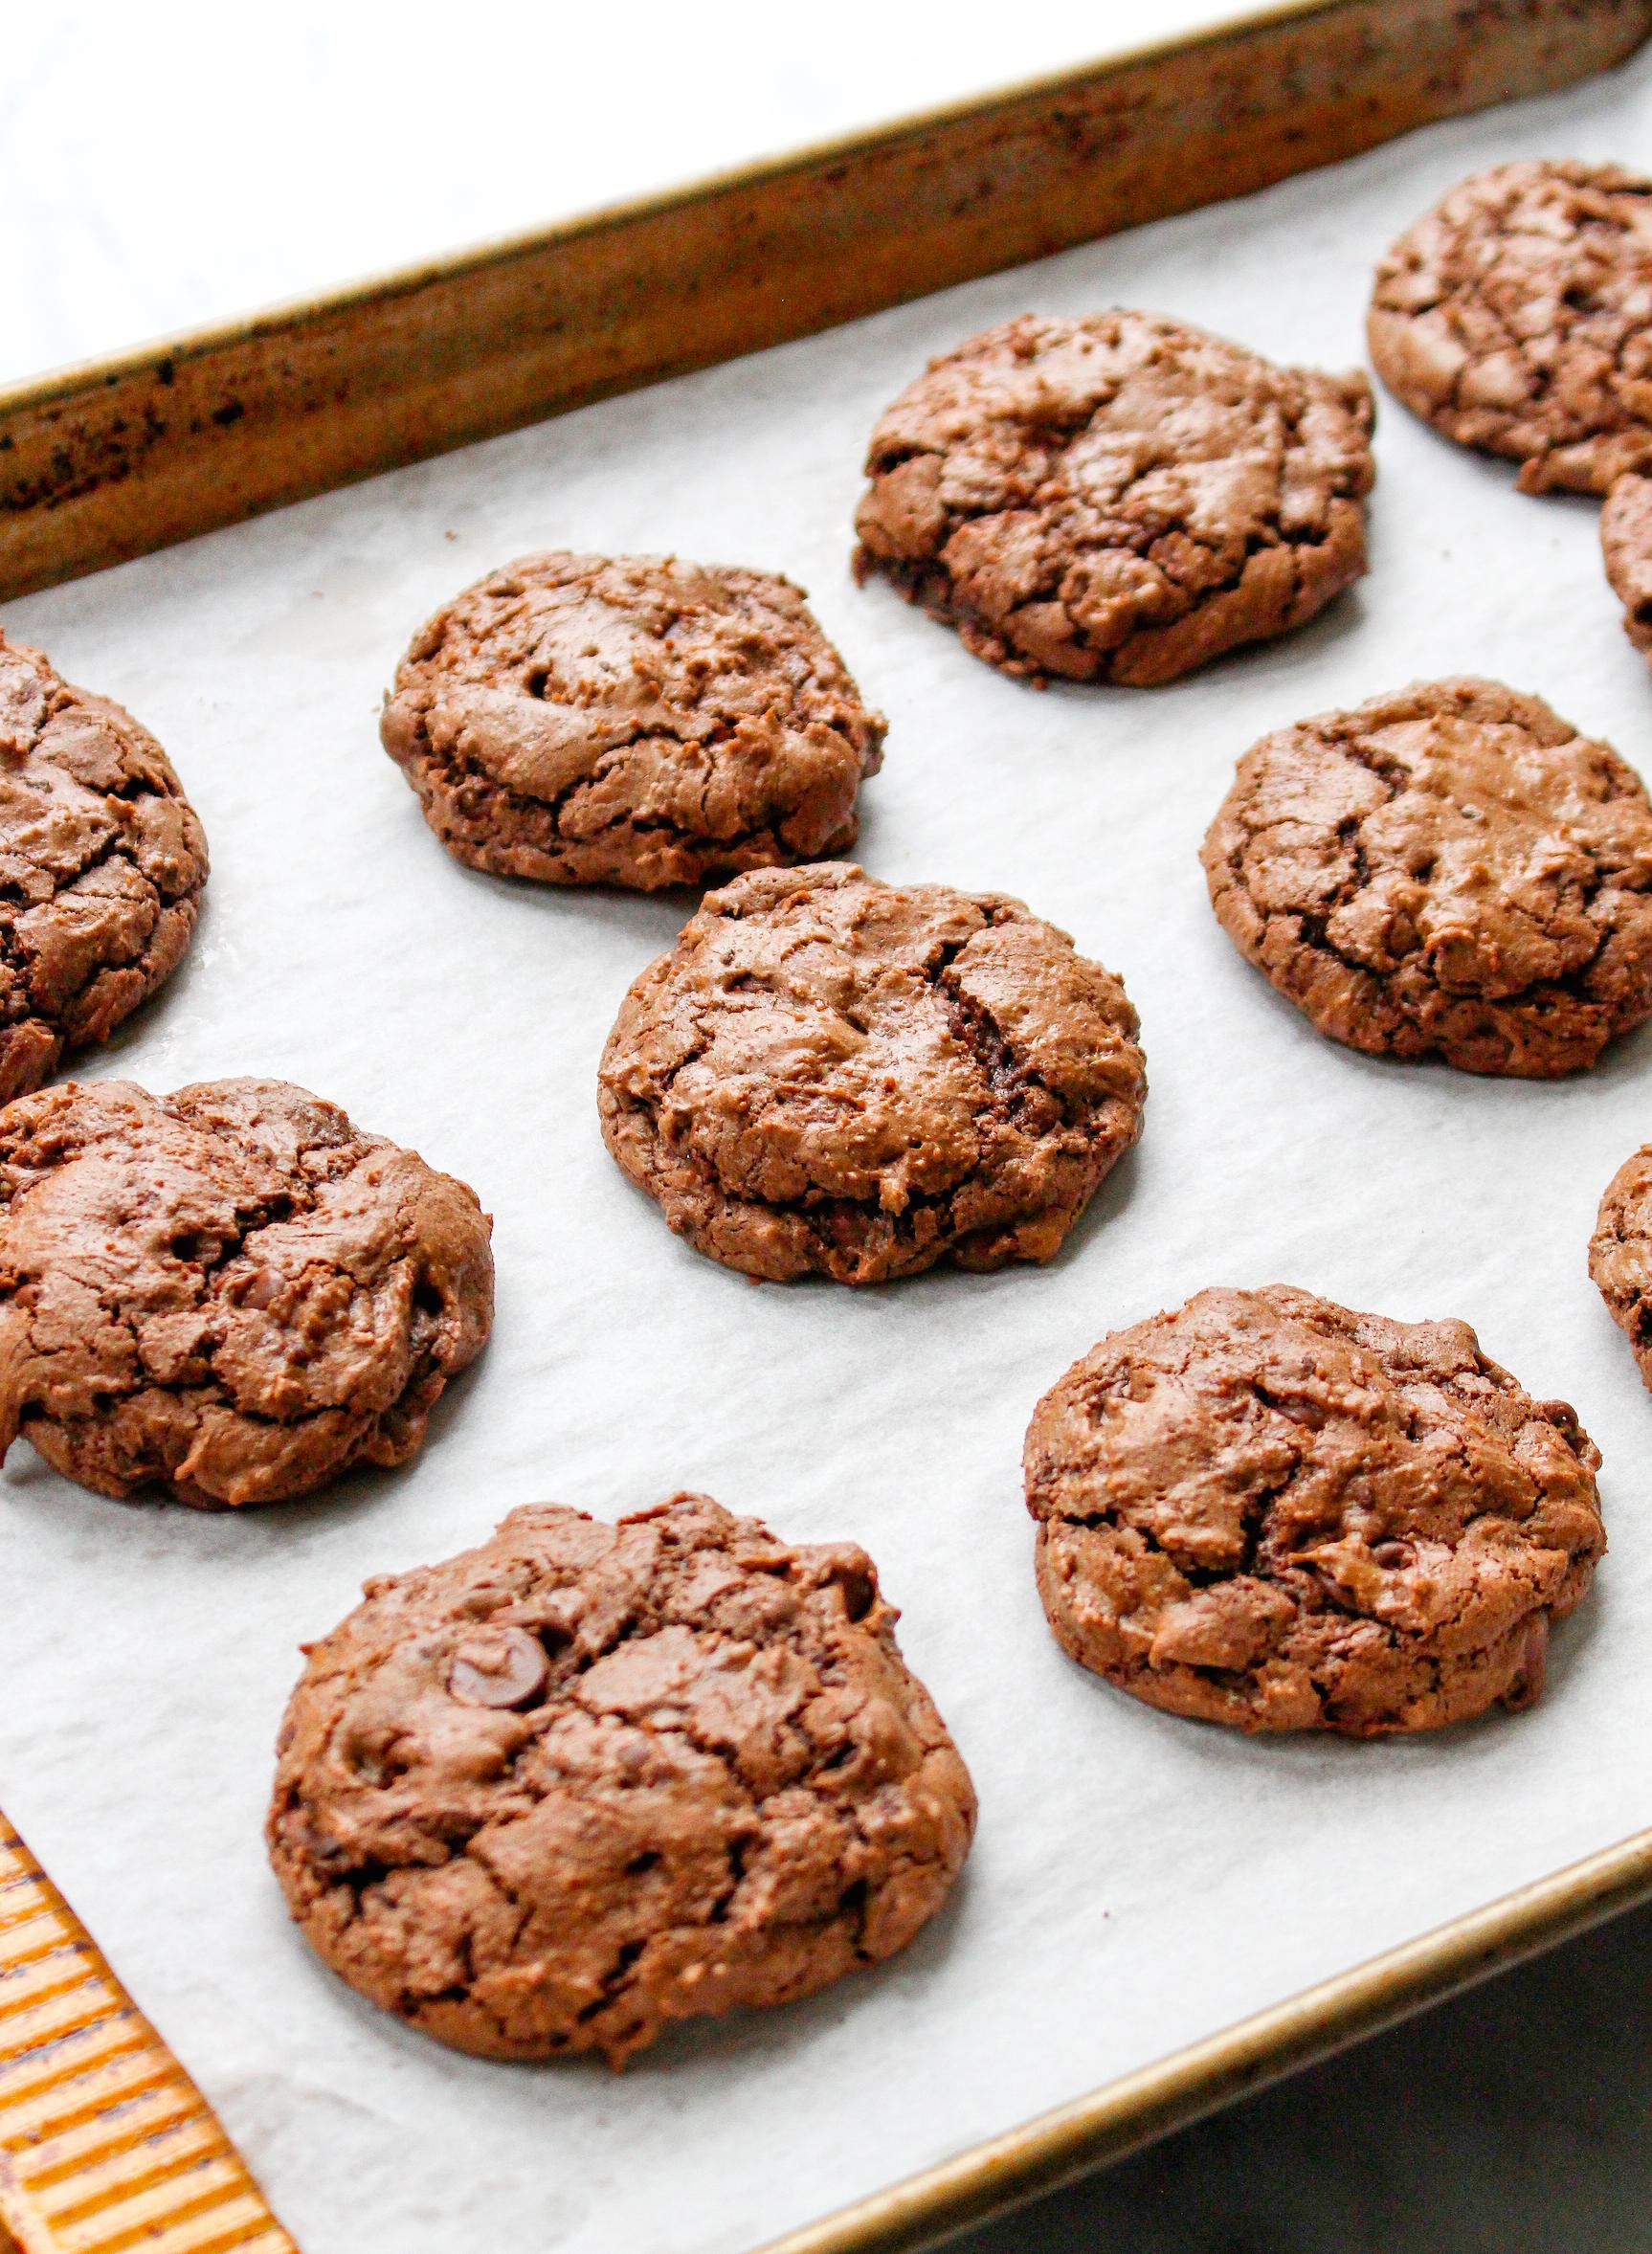  Kickstart your day with these delightful cookies!